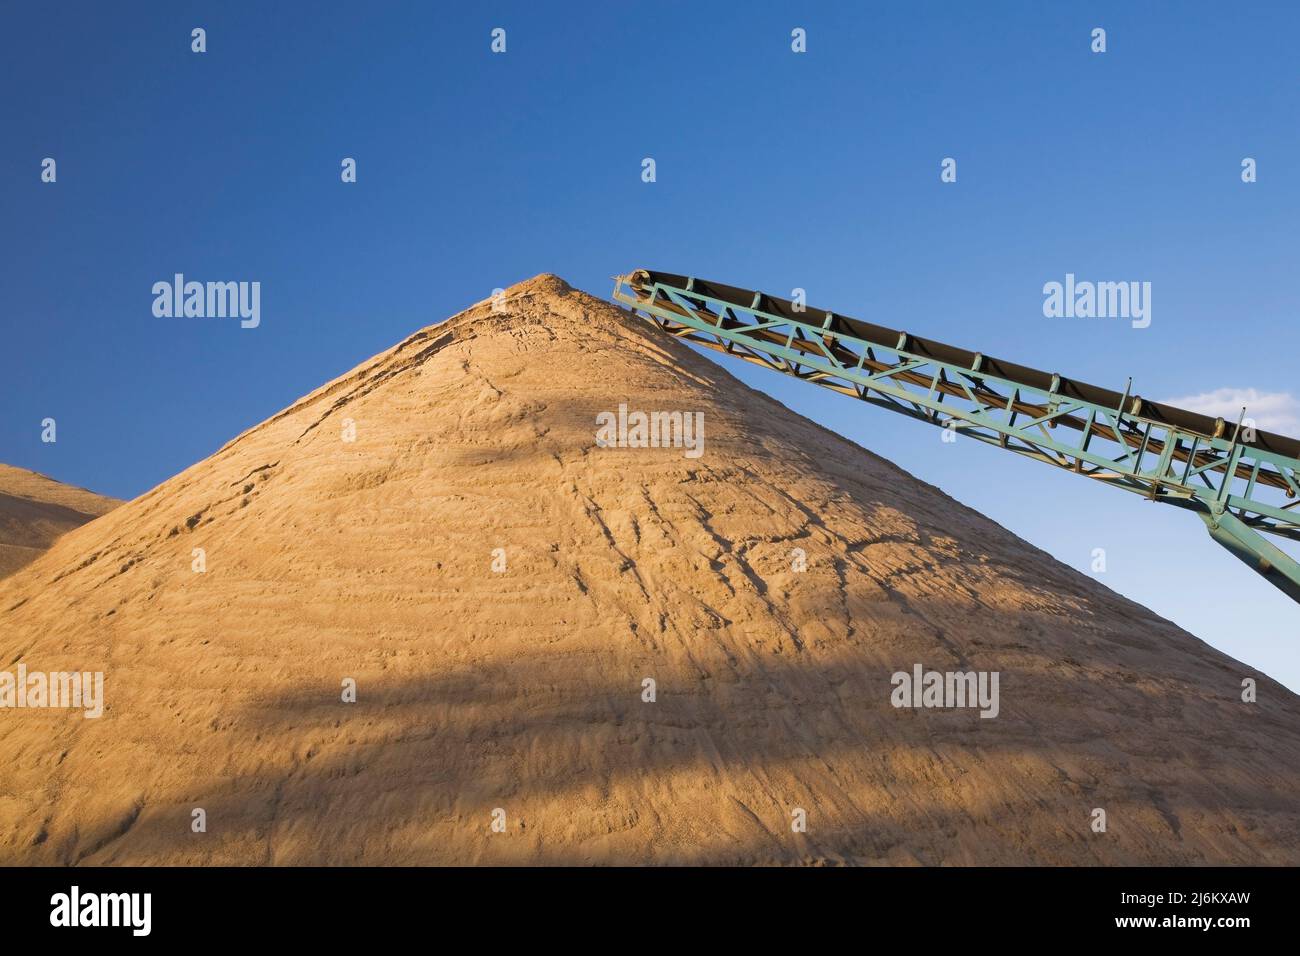 Mound of sand and stacking conveyor in commercial sandpit. Stock Photo